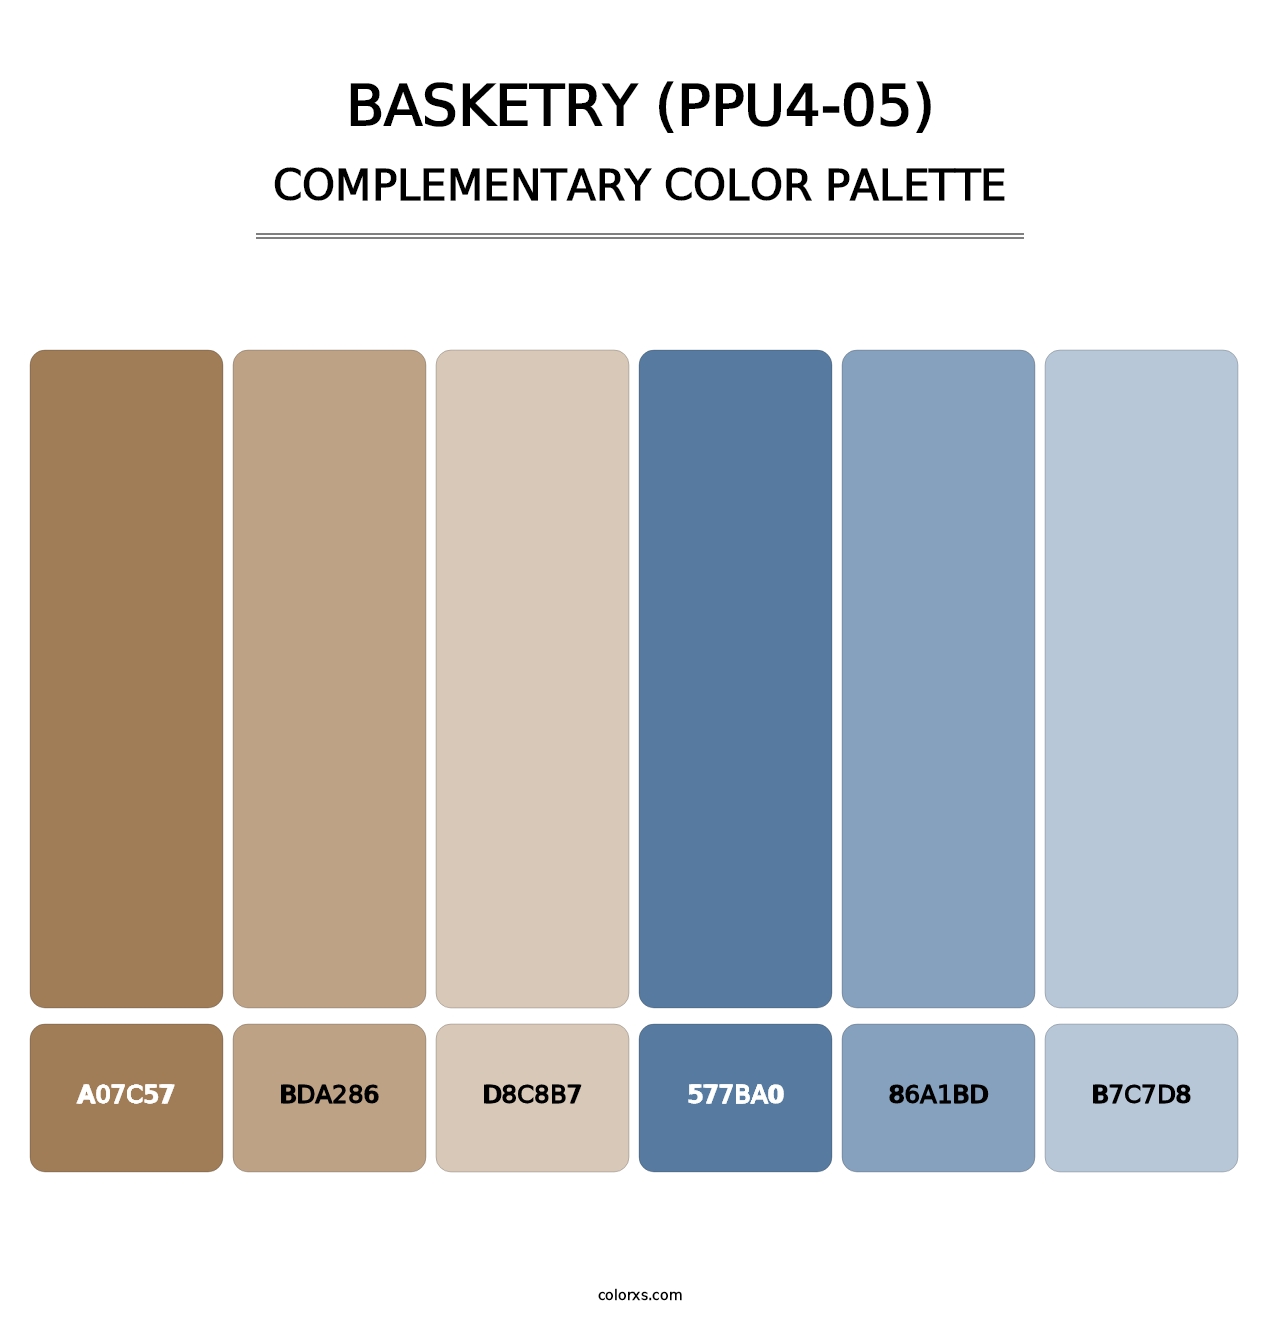 Basketry (PPU4-05) - Complementary Color Palette